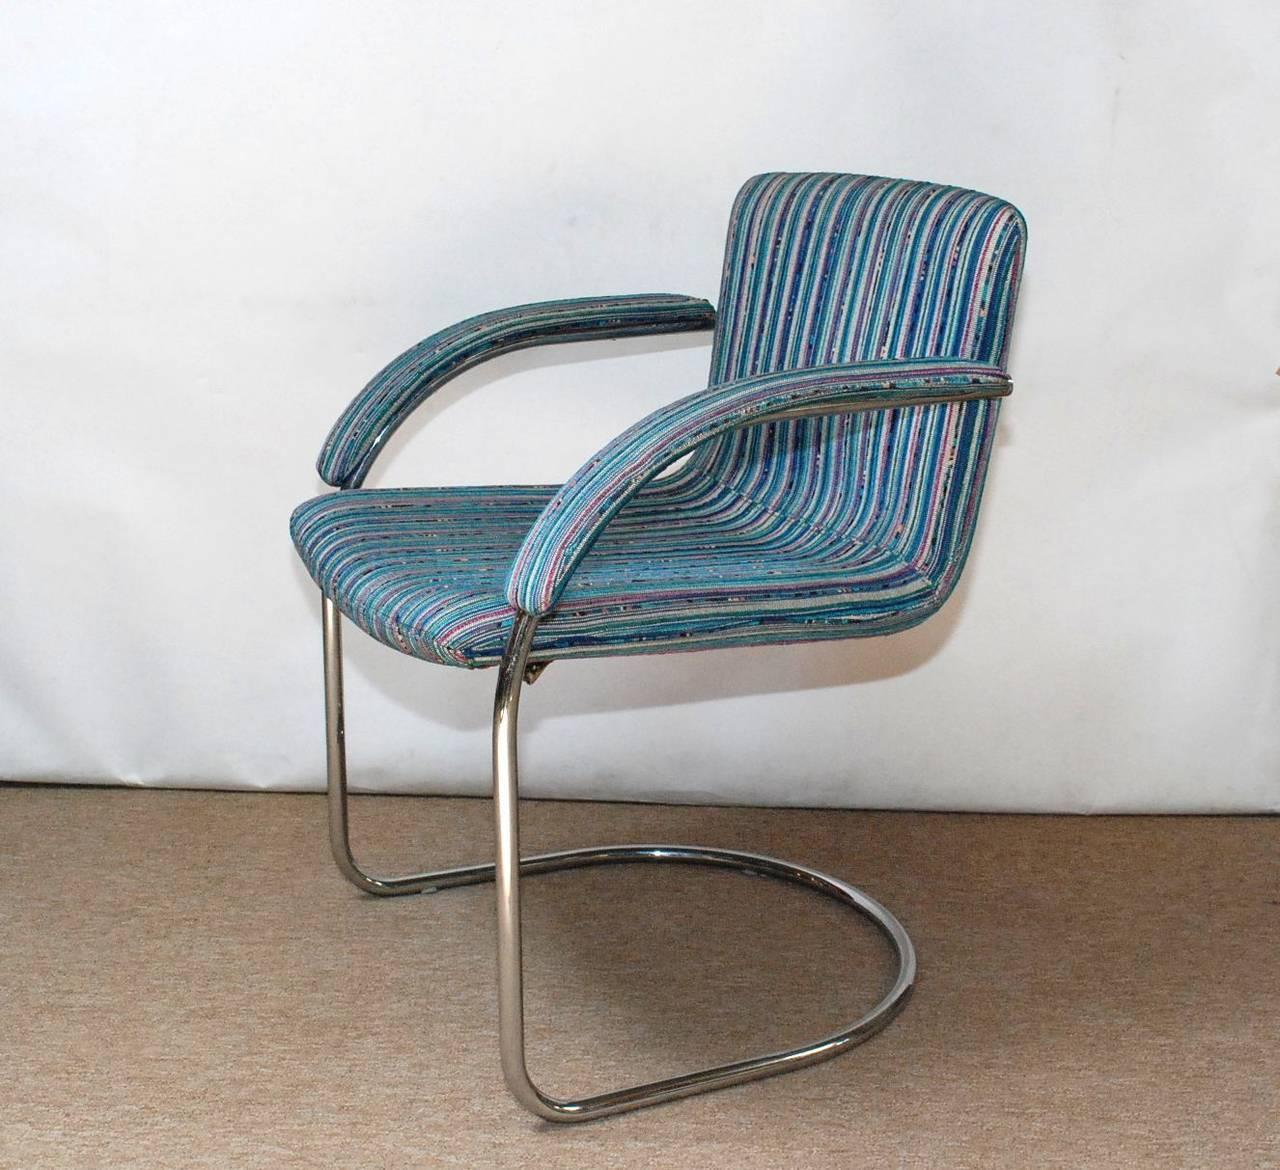 Set of four Italian Mid-Century cantilever chairs with chrome frame and original chenille upholstery by Saporiti Italia. Original label under the seat / Made in Italy in the 1960's.
Depth: 24 inches / Width: 26 inches / Height: 31 inches / Seat